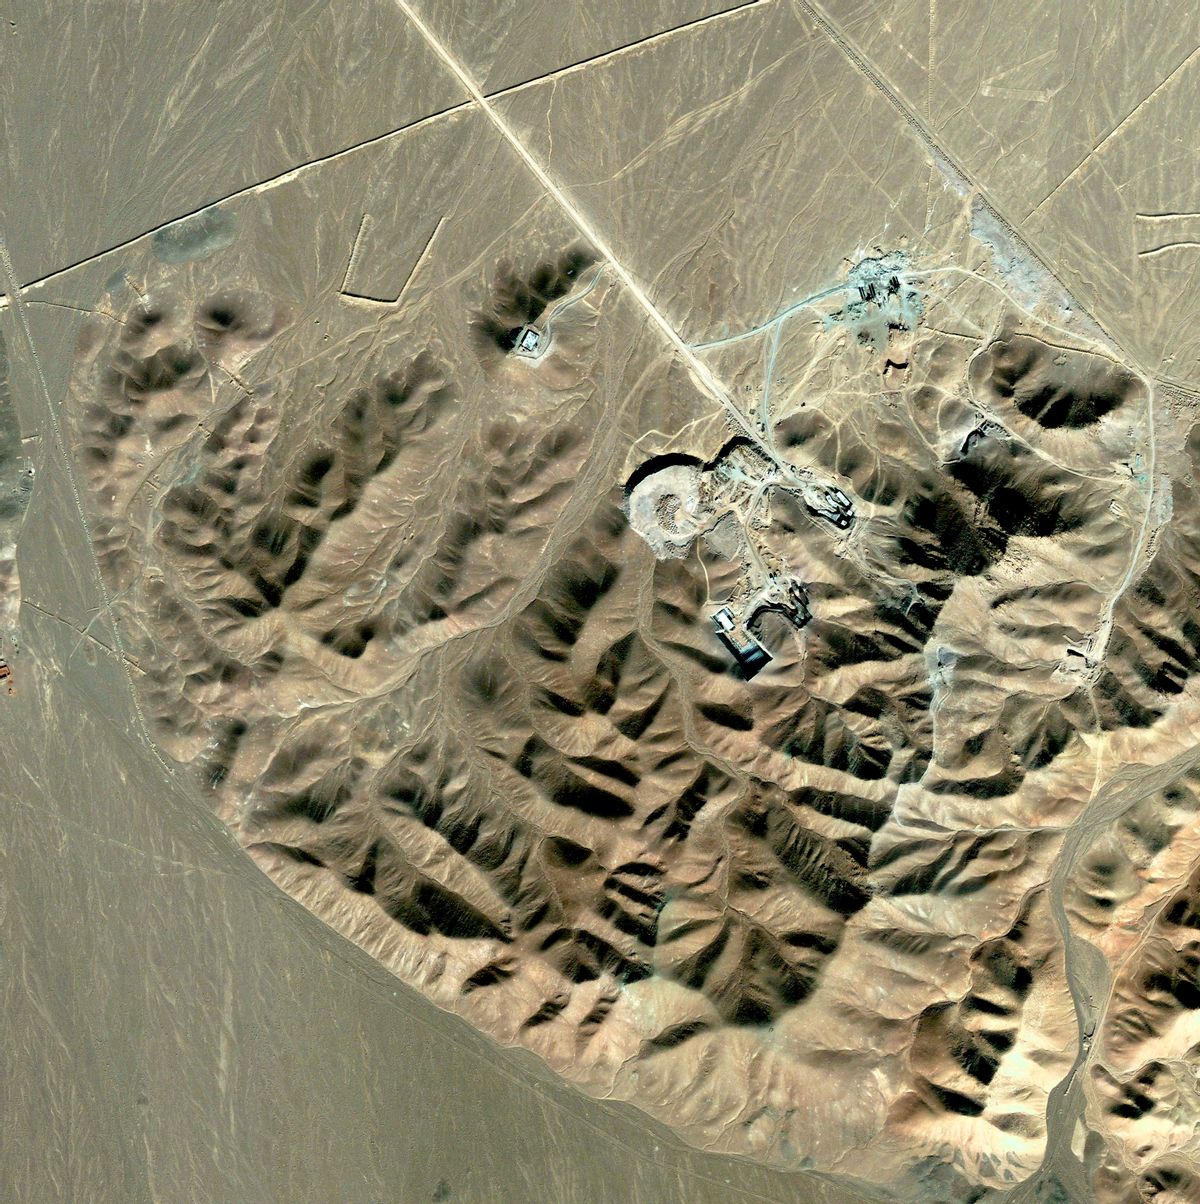 A view of what is believed to be a uranium-enrichment facility near Qom, Iran, is seen in this satellite photograph released September 25, 2009. Iranian President Mahmoud Ahmadinejad said Friday the United States, Britain and France would "regret" accusing Iran of hiding a nuclear fuel facility, saying it was not a secret site. REUTERS/DigitalGlobe/Handout (IRAN SCI TECH POLITICS IMAGES OF THE DAY) FOR EDITORIAL USE ONLY. NOT FOR SALE FOR MARKETING OR ADVERTISING CAMPAIGNS. MANDATORY CREDIT (Reuters)